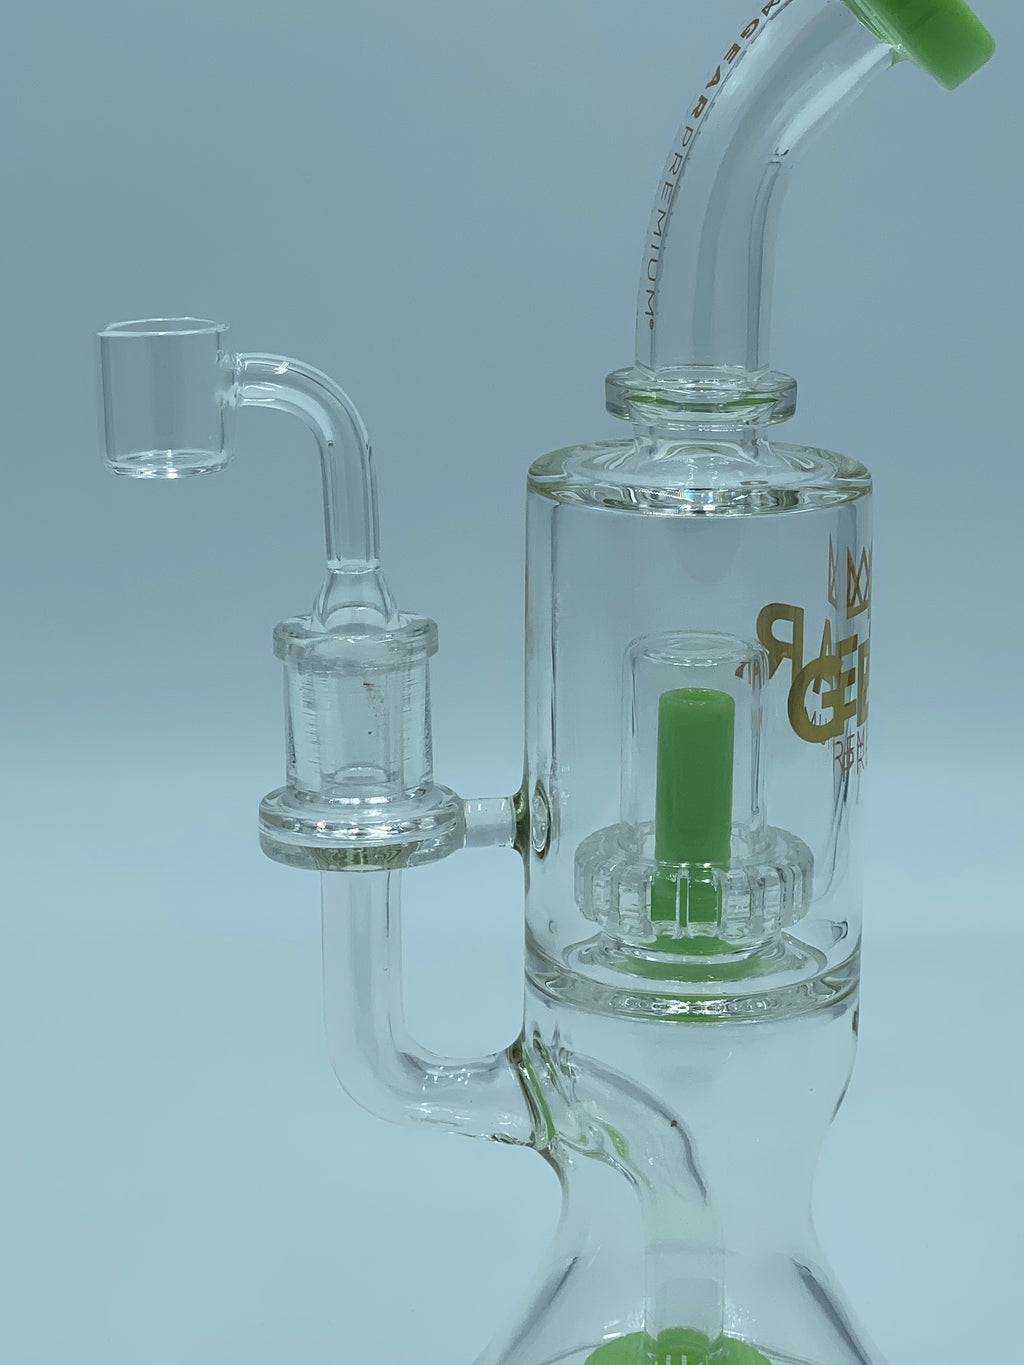 GEAR PREMIUM DOUBLE SHOWER HEAD RIG - Smoke Country - Land of the artistic glass blown bongs